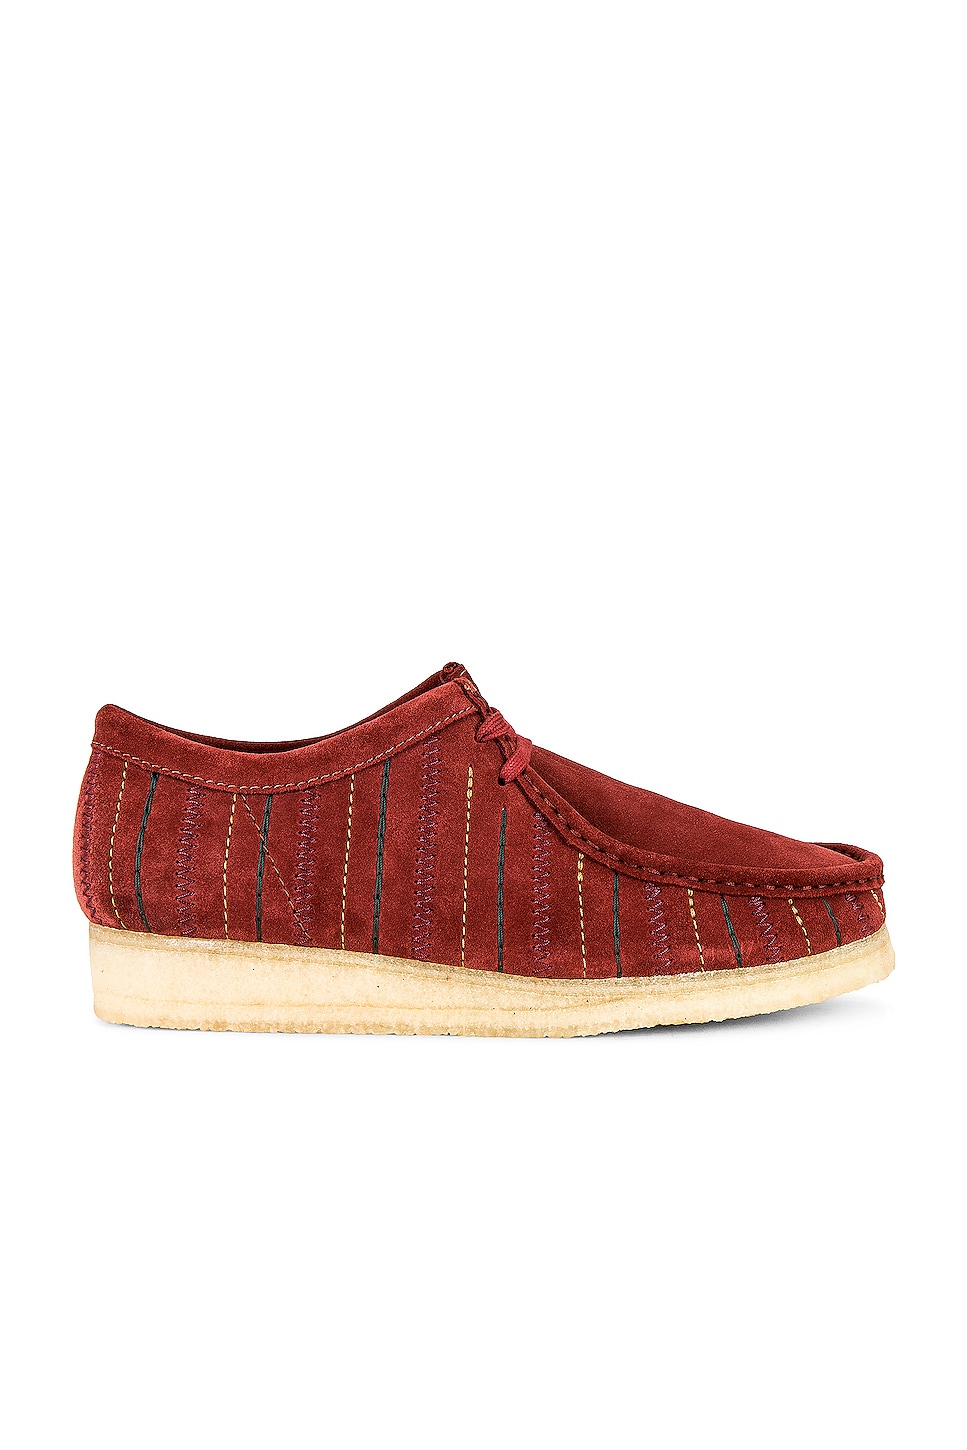 Image 1 of Clarks Wallabee Dance Hall Shoe in Burgundy